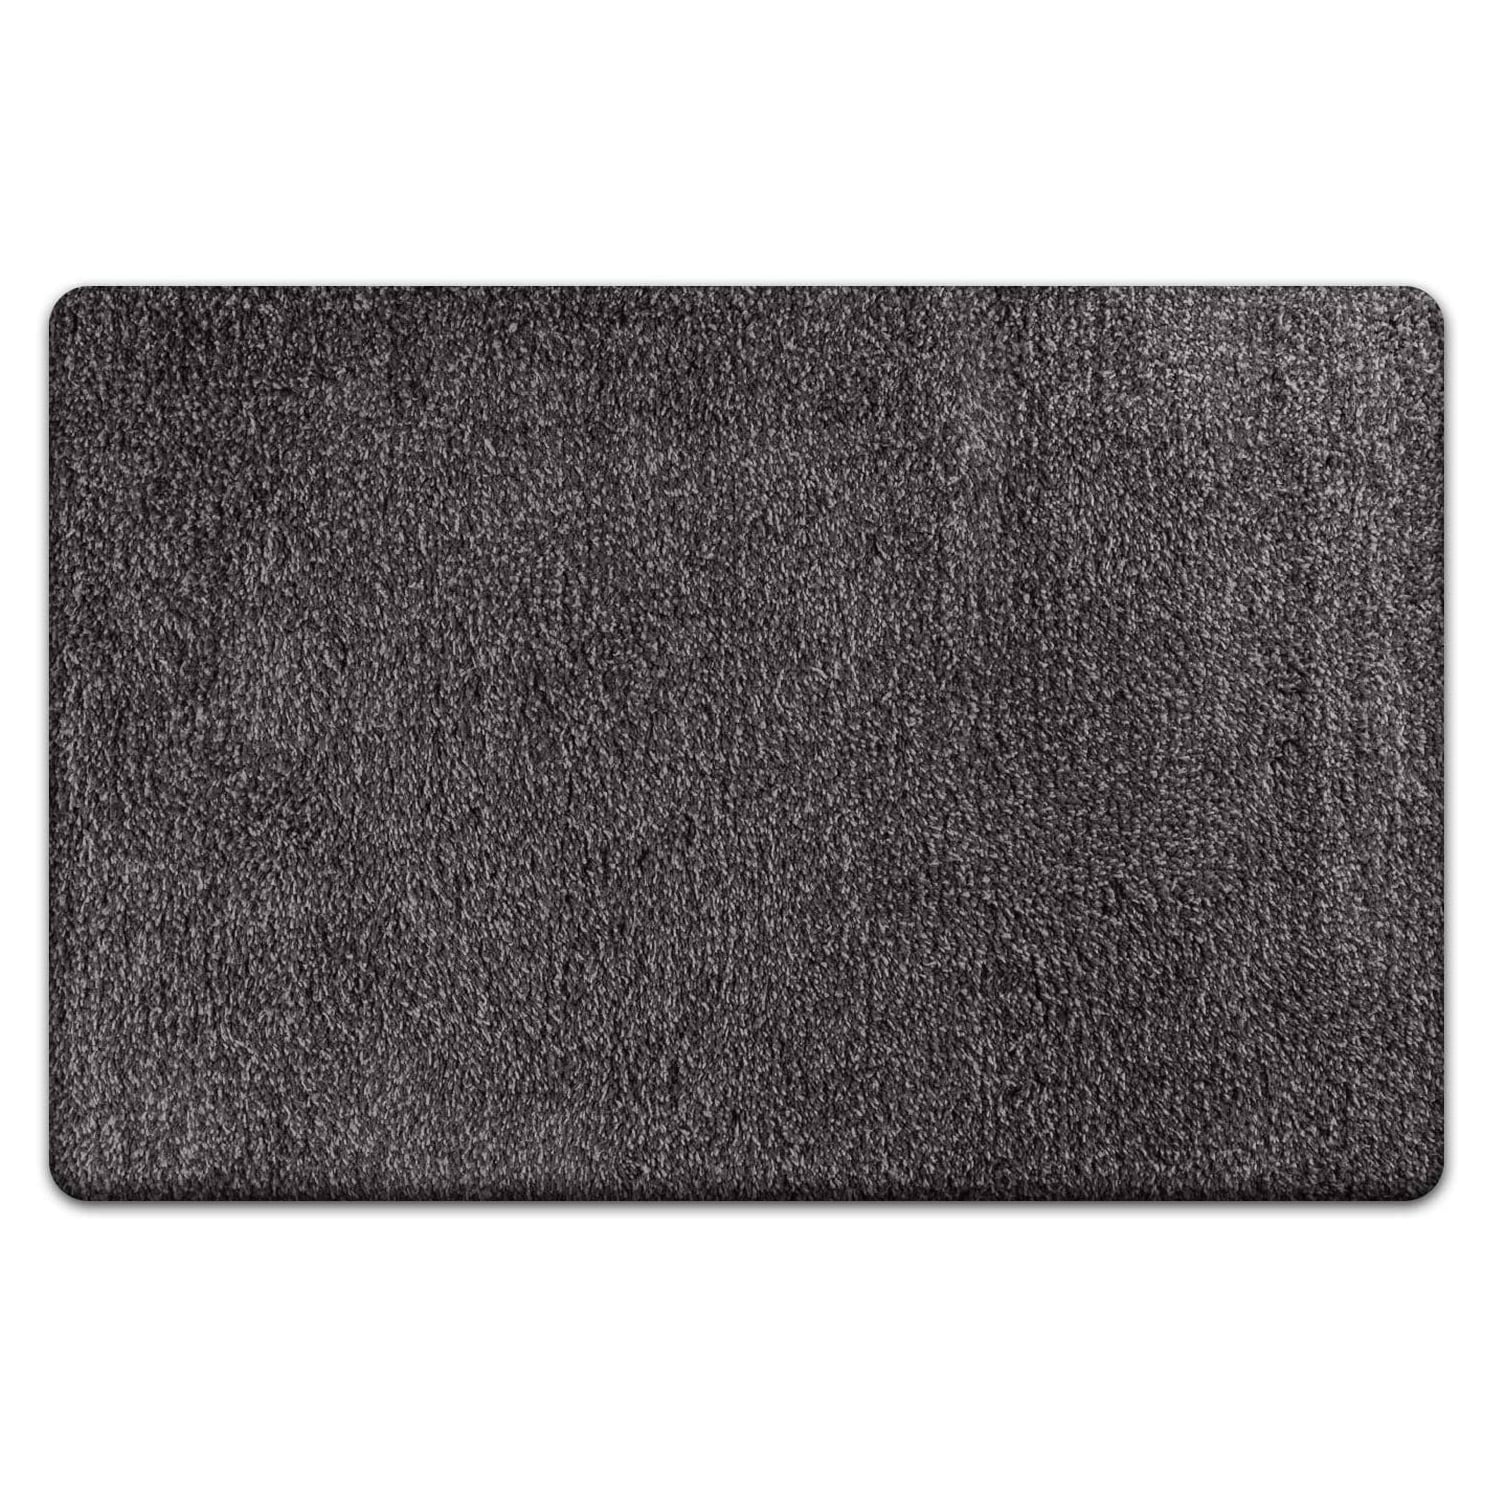 https://ak1.ostkcdn.com/images/products/is/images/direct/2c9a2d3fb35ce1f4ae31a9cdd2526c513e274448/Door-Mat%2C-Entry-Rug%2C-Super-Absorbent%2C-20-X-30.jpg